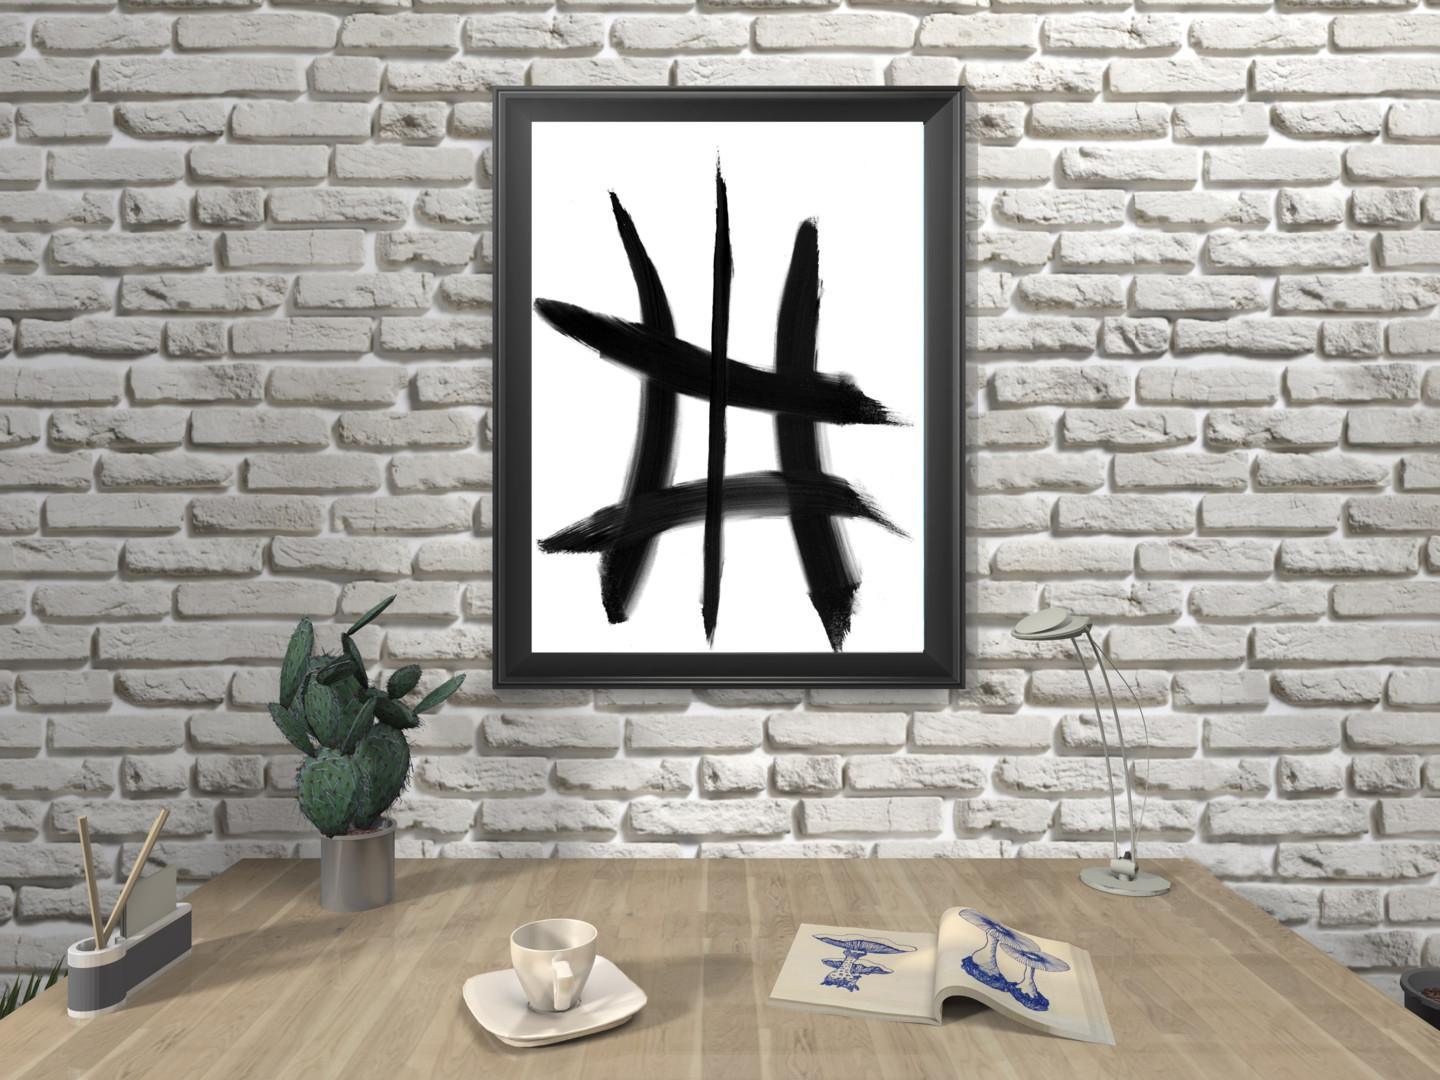 Anastasia Vasilyeva - Black white abstraction 021 (2020)

Painting on high quality, acid free, high density paper. Conceptual minimalist abstract painting designed in calligraphic style. The picture is painted on thick paper and can be framed for